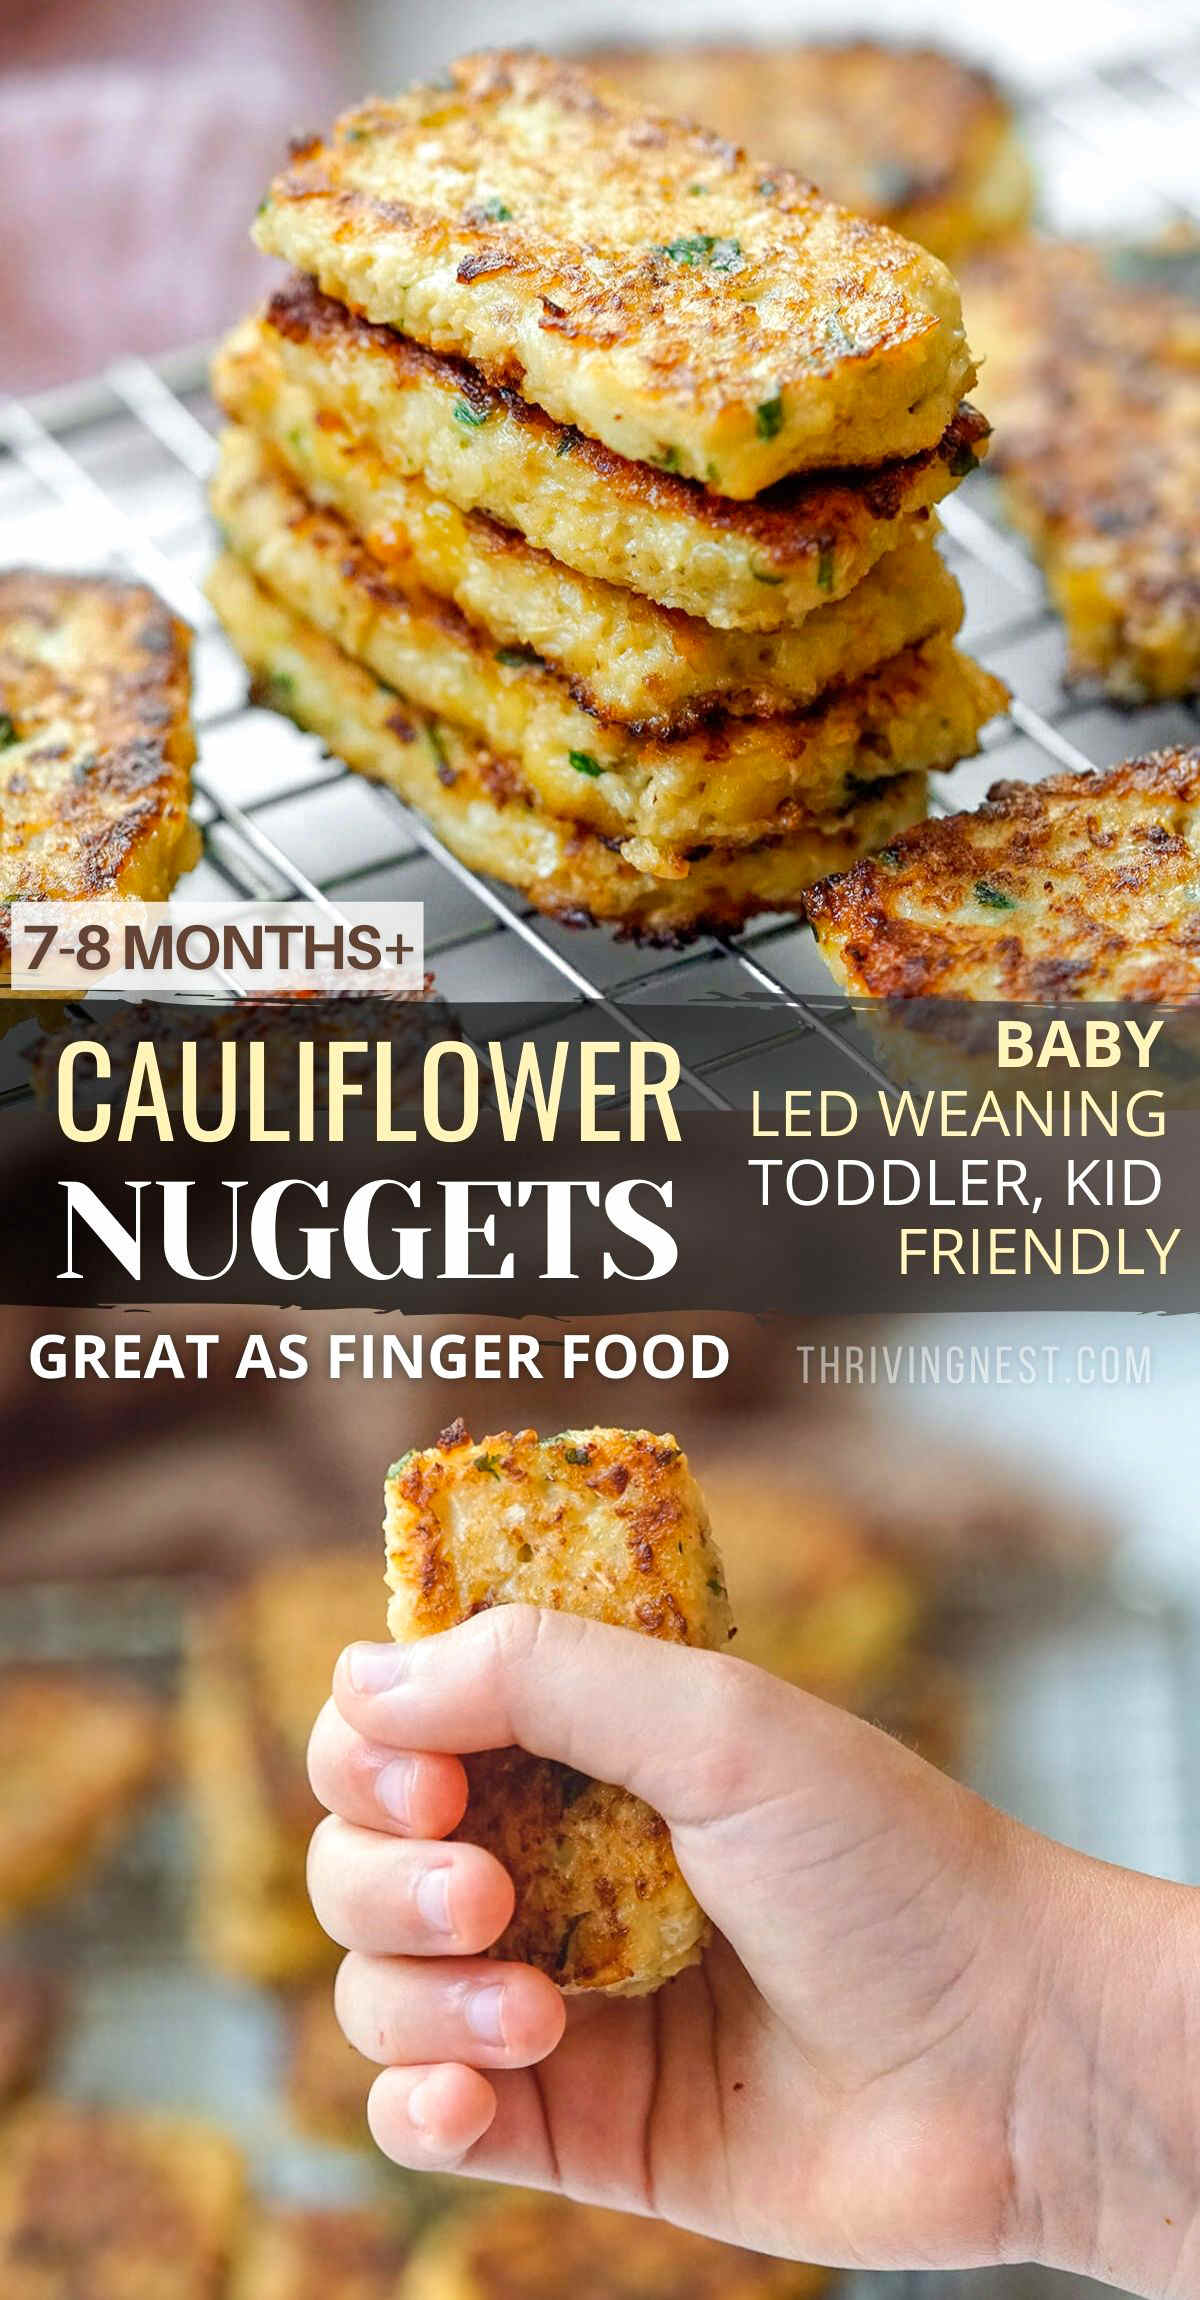 Looking for cauliflower baby food recipes? These cauliflower nuggets (also called cauliflower tots or bites) are small in size, making a great finger food for baby led weaning, toddlers, older kids and even adults. This is a perfect cauliflower recipe for babies who need to develop their motor skills and discover new food textures. Make the cauliflower nuggets healthier baked,  or fried. #cauliflower #baby #fingerfood #kidsrecipes #cauliflowernuggets #cauliflowertots #cauliflowerbites #toddler